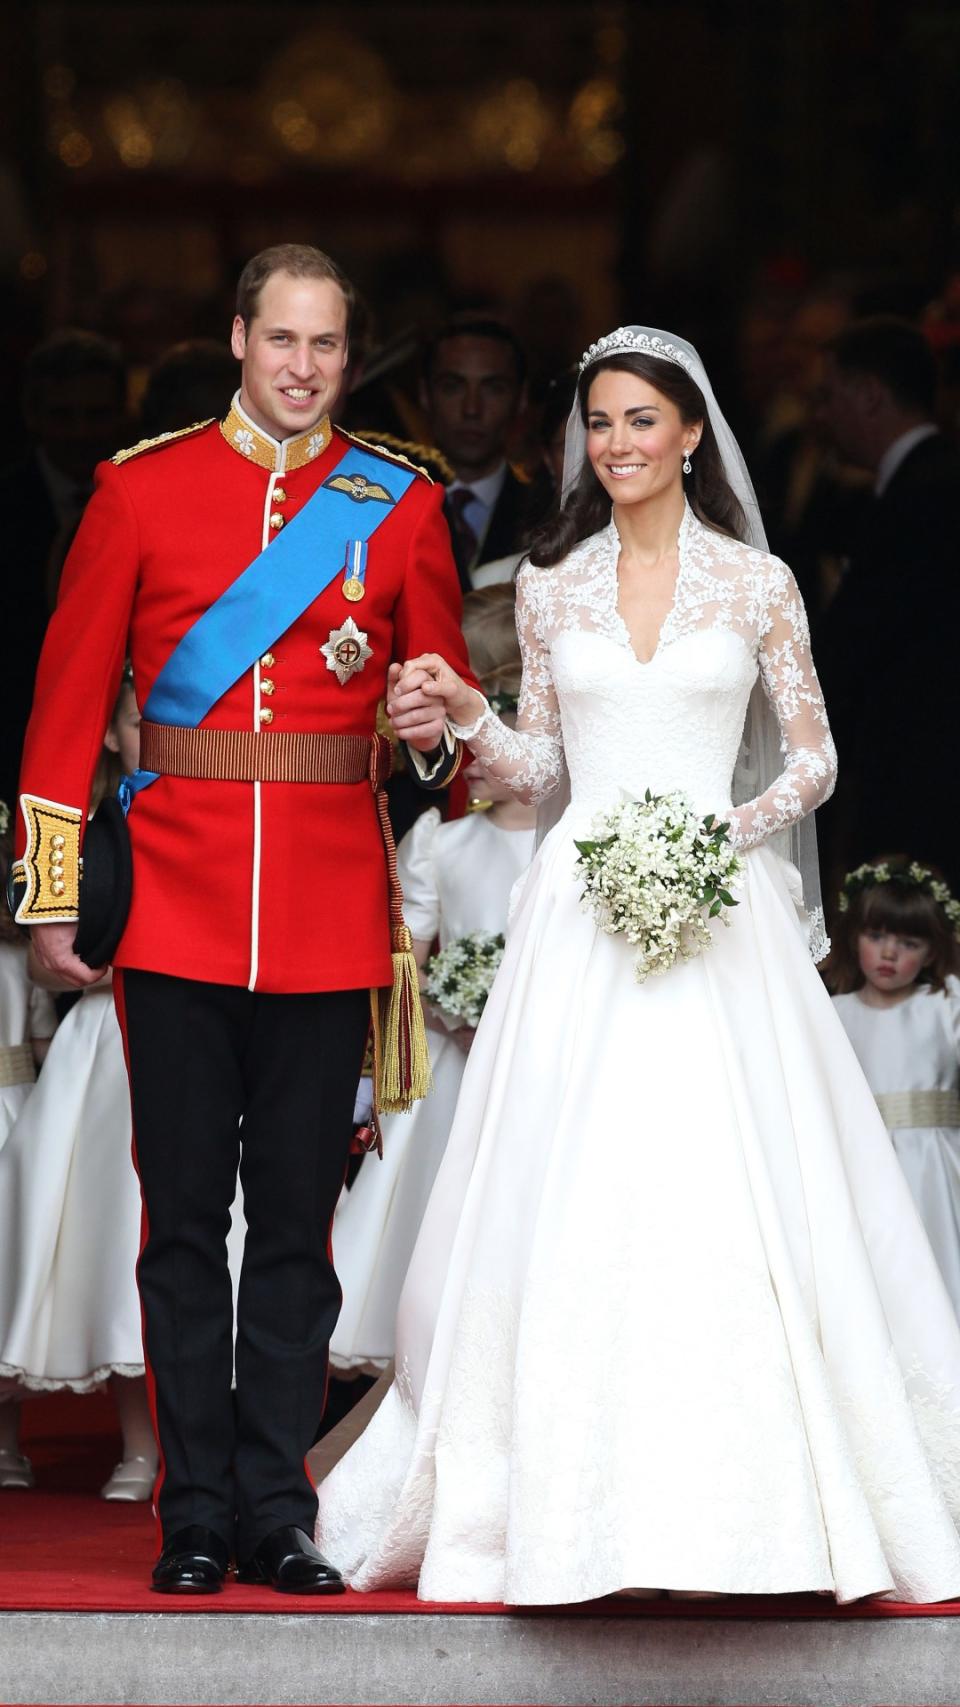 William and Kate’s wedding guestlist